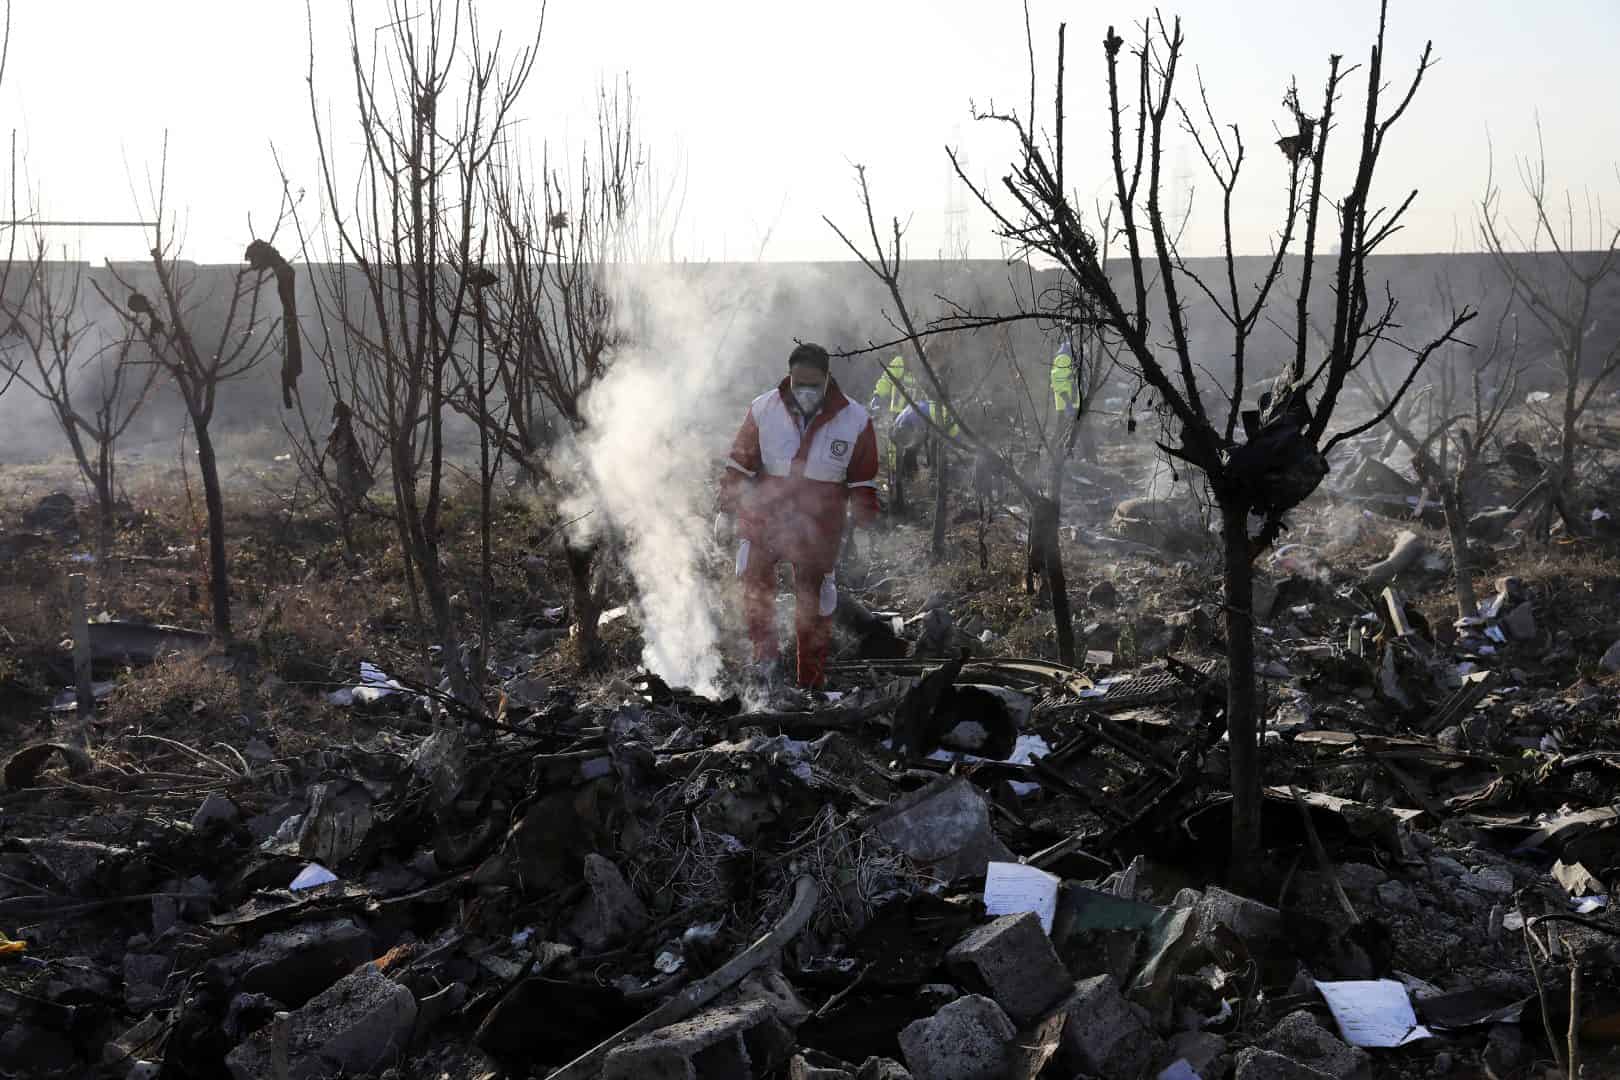 Plane crash which killed 176, including three Brits, caused by fire, Iran says